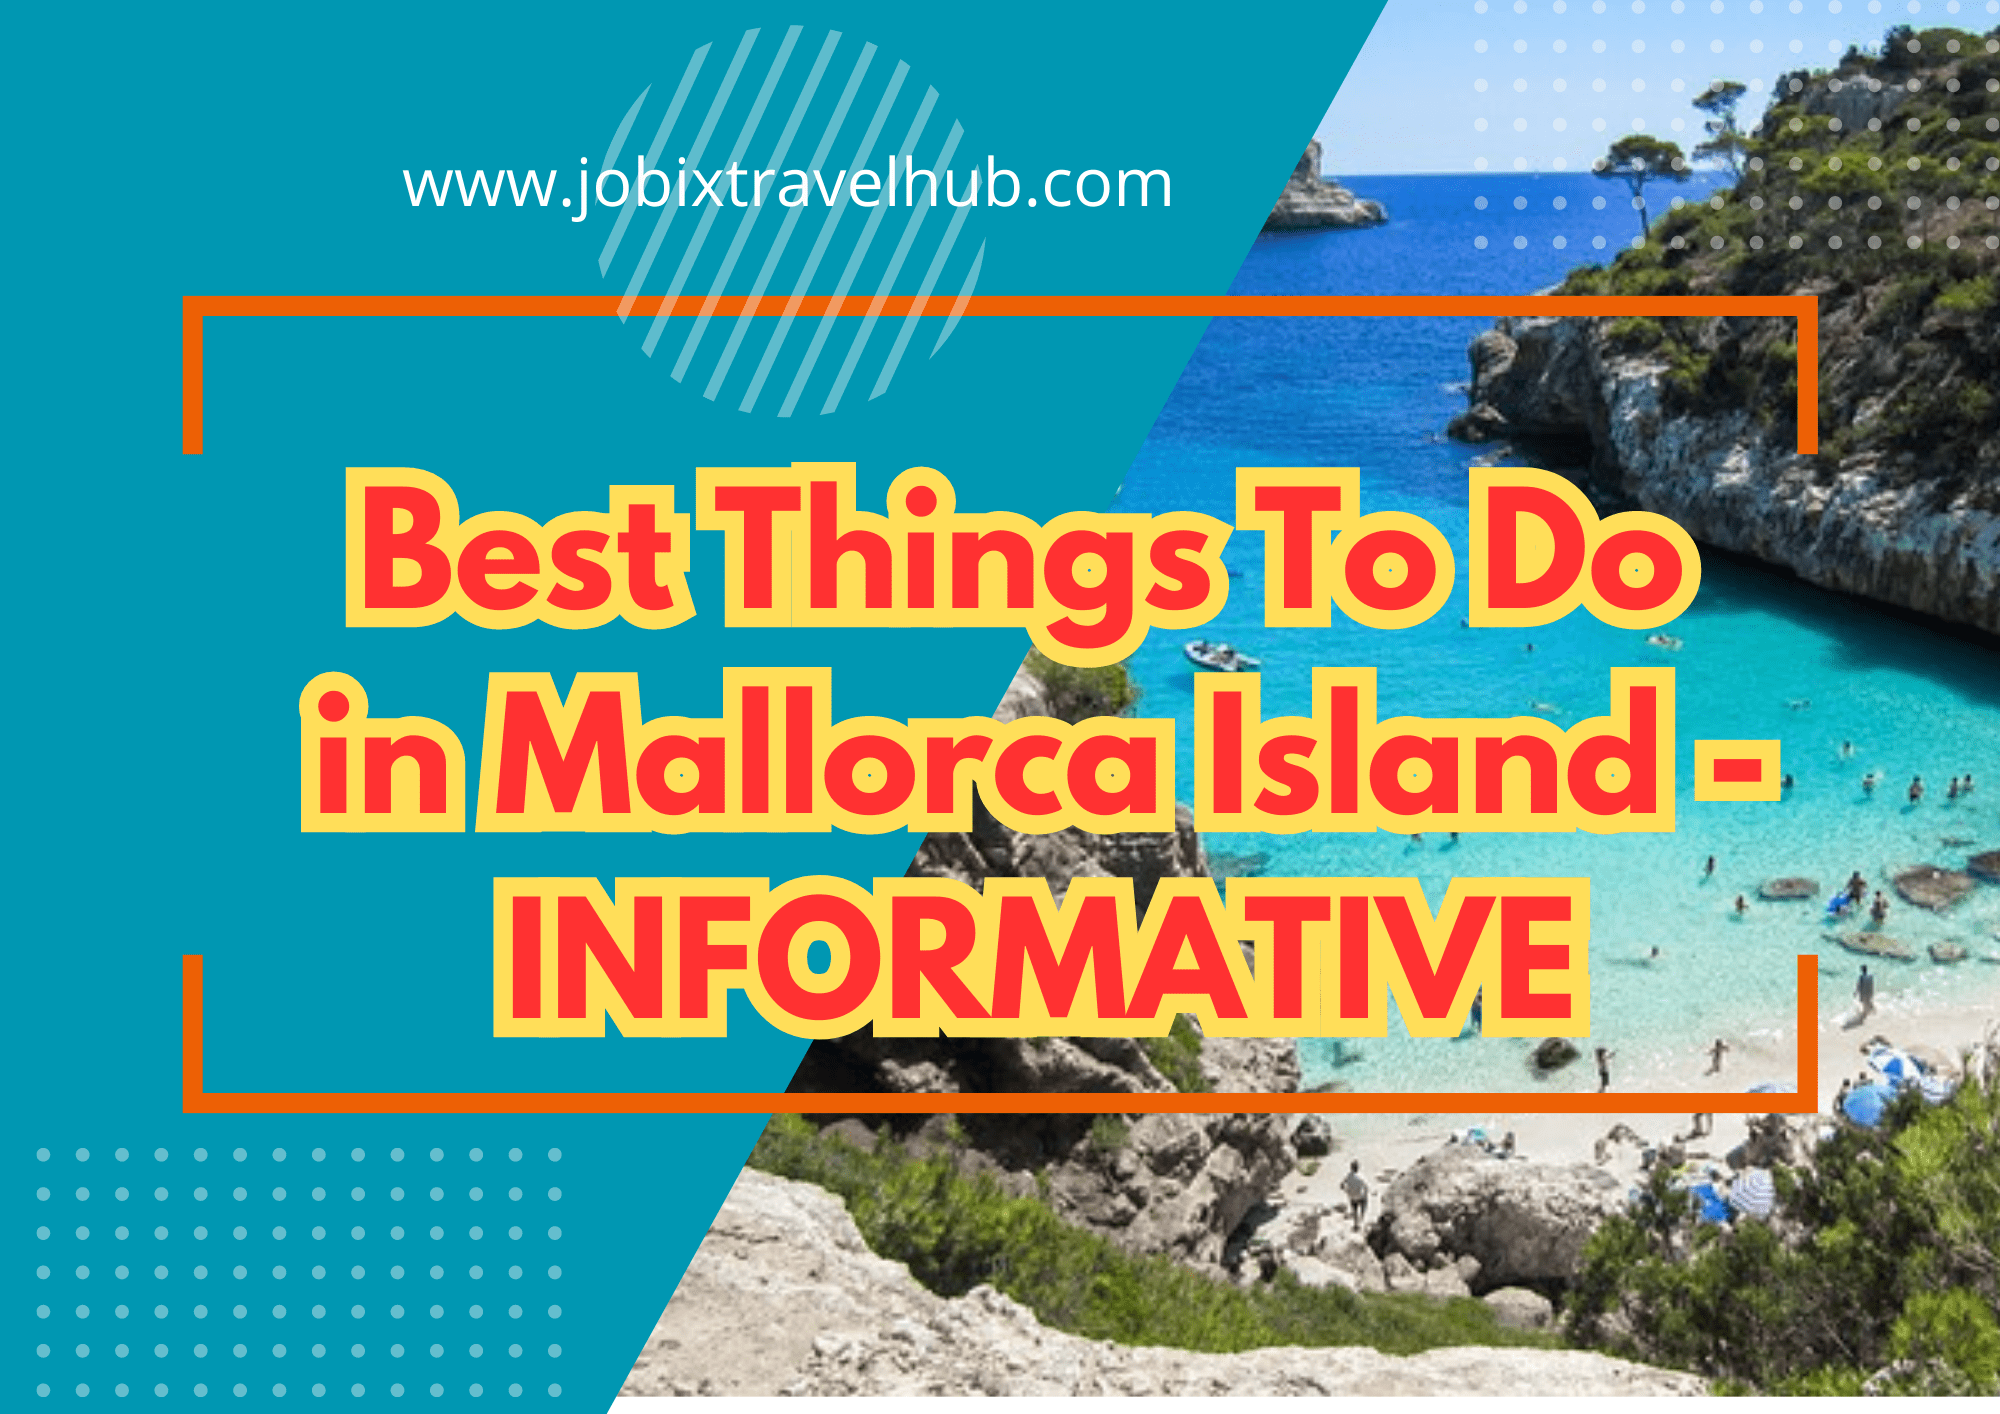 The Best Things To Do in Mallorca - INFORMATIVE